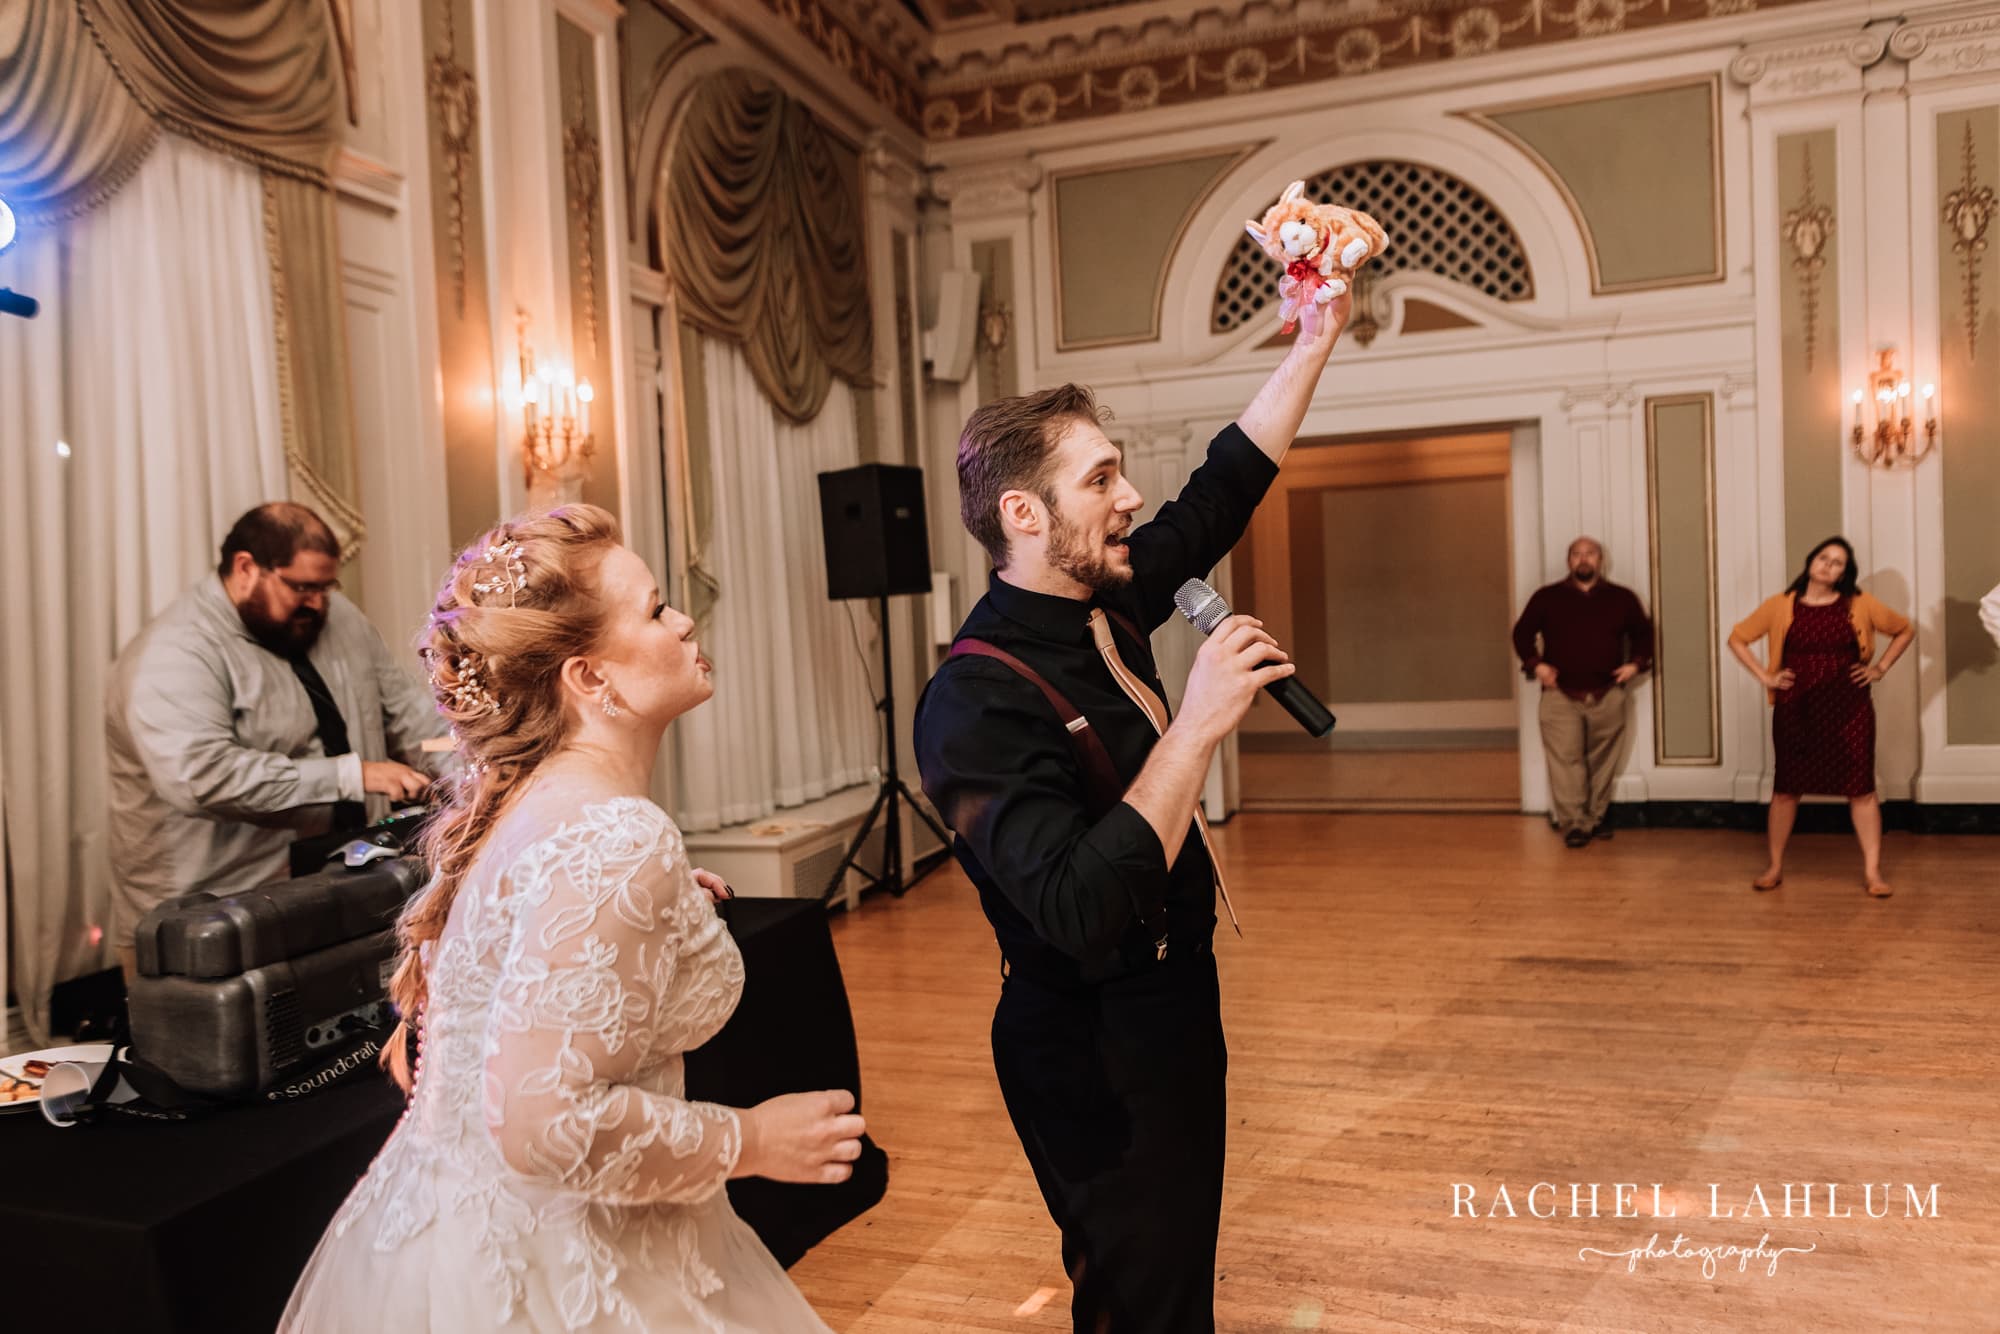 Groom holds up stuffed animal to be thrown into the audience in place of a wedding bouquet.